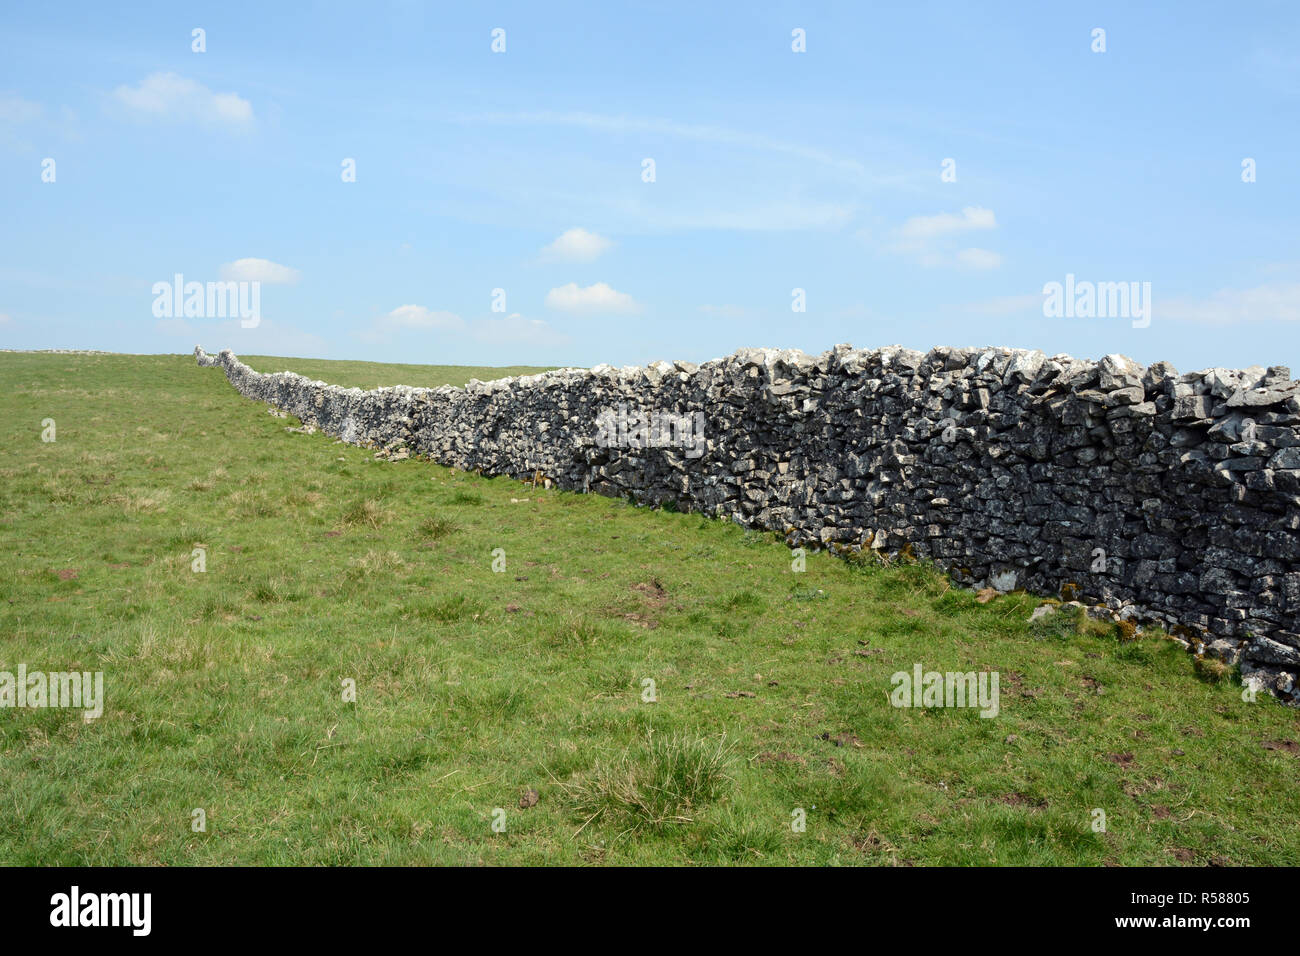 A dry stone wall running across the moors along the Dales Way hiking trail, in Yorkshire, northern England, United Kingdom. Stock Photo